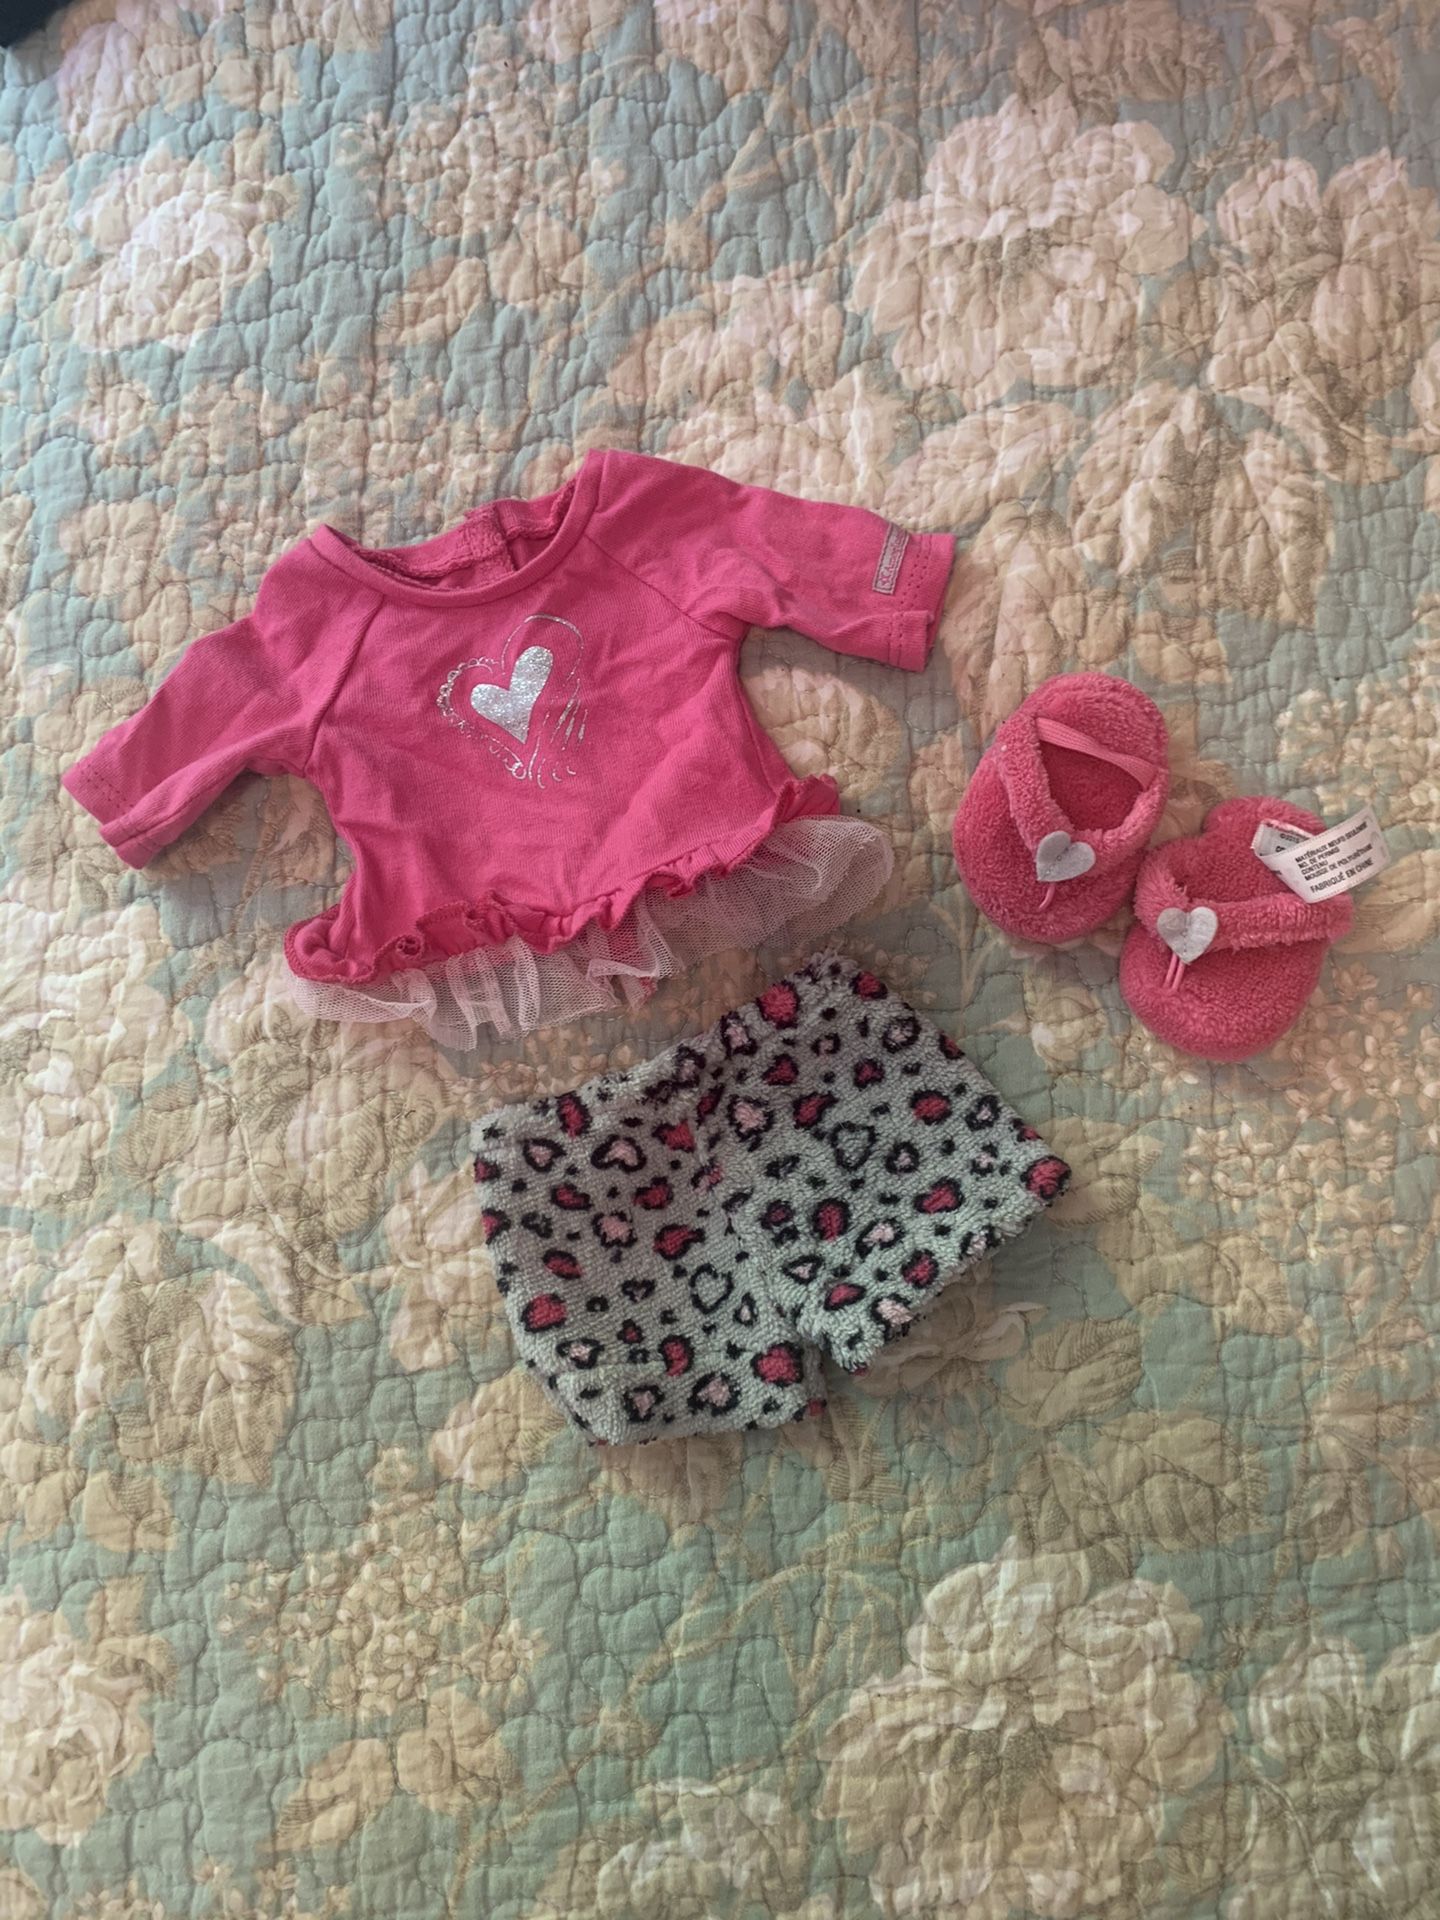 American Girl Doll “Lovely Leopard Pj’s” Outfit